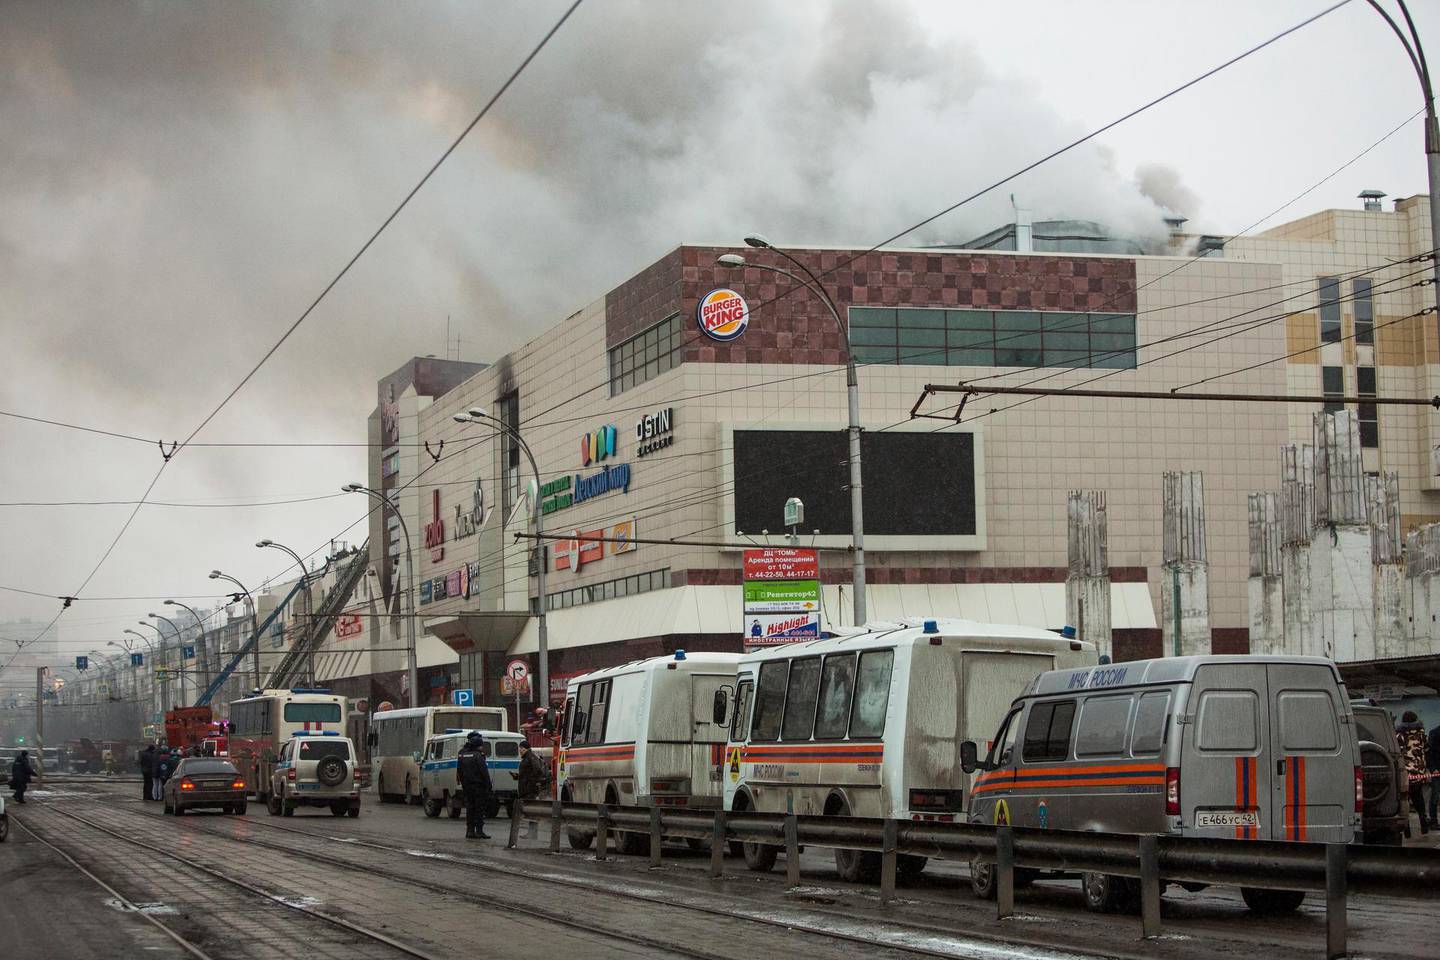 Smoke rises above a multi-story shopping center in the Siberian city of Kemerovo, about 3,000 kilometers (1,900 miles) east of Moscow, Russia, on Sunday, March 25, 2018. At least three children and a woman have died in a fire that broke out in a multi-story shopping center in the Siberian city of Kemerovo. (AP Photo/Sergei Gavrilenko)